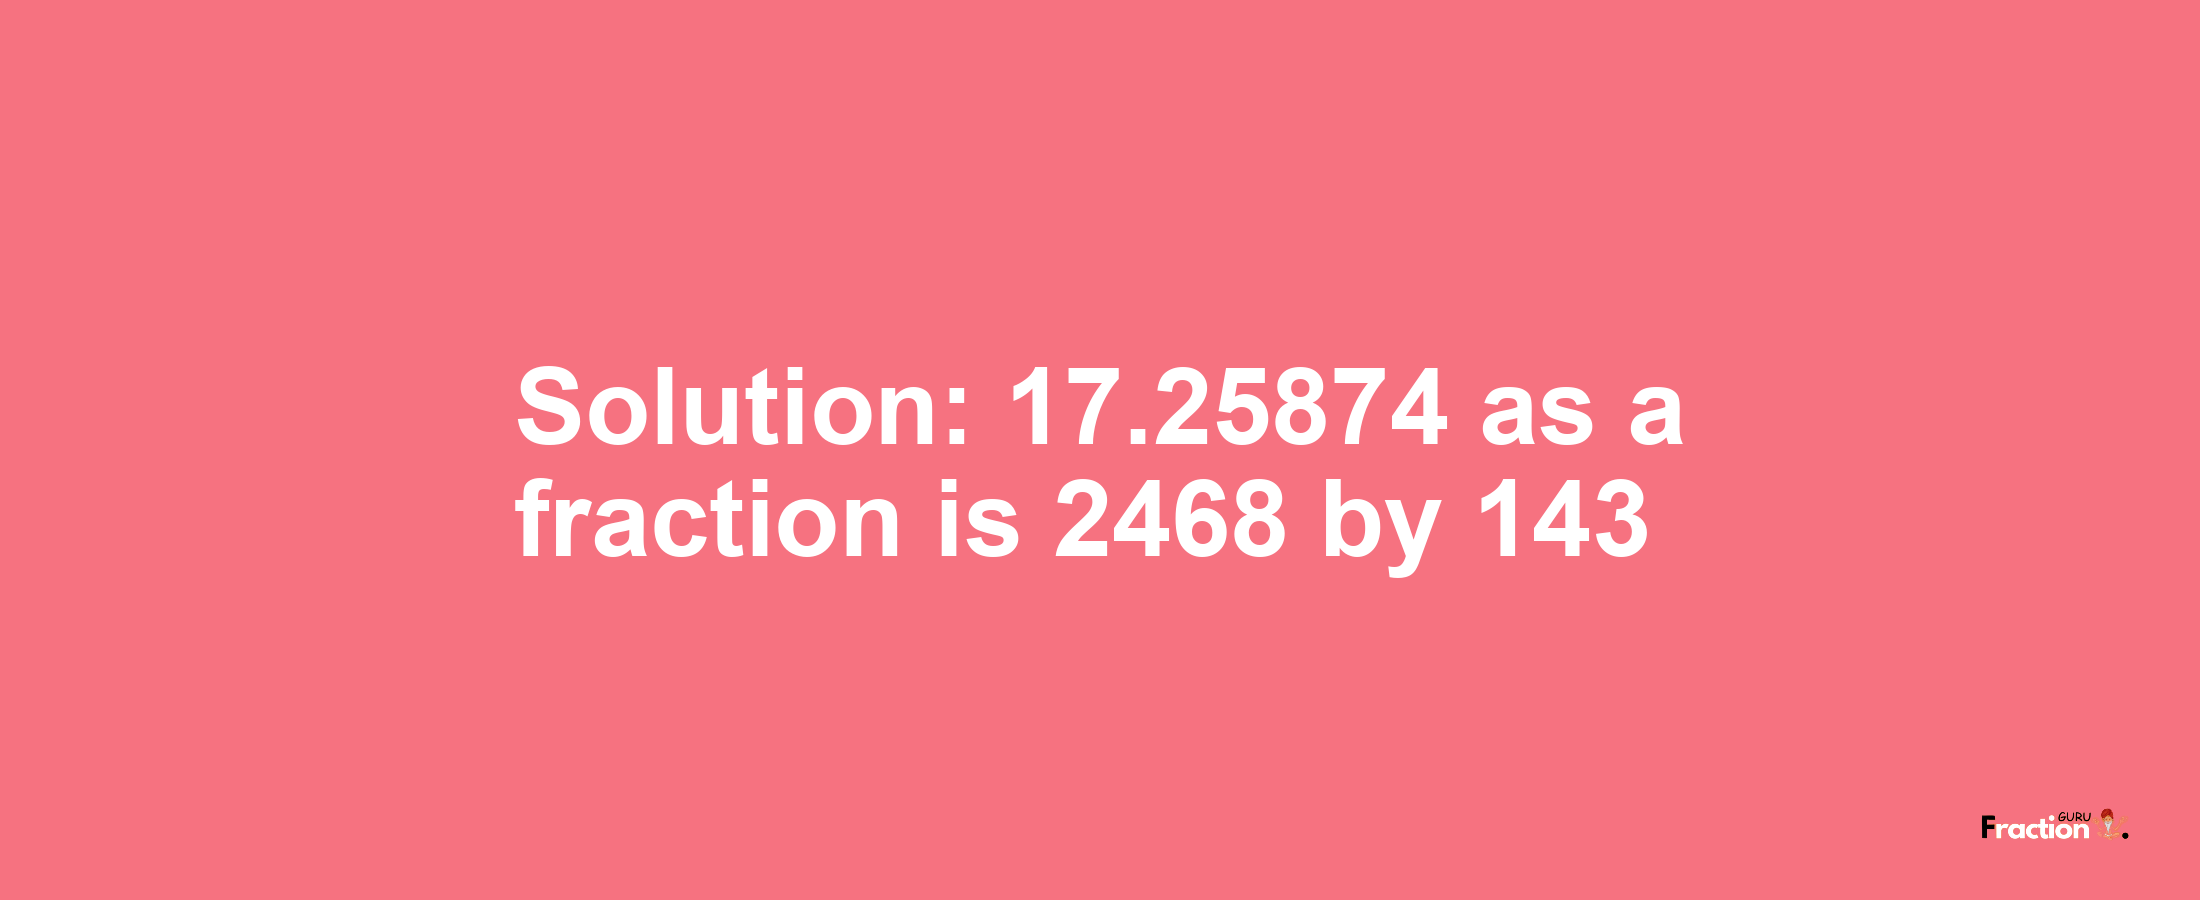 Solution:17.25874 as a fraction is 2468/143